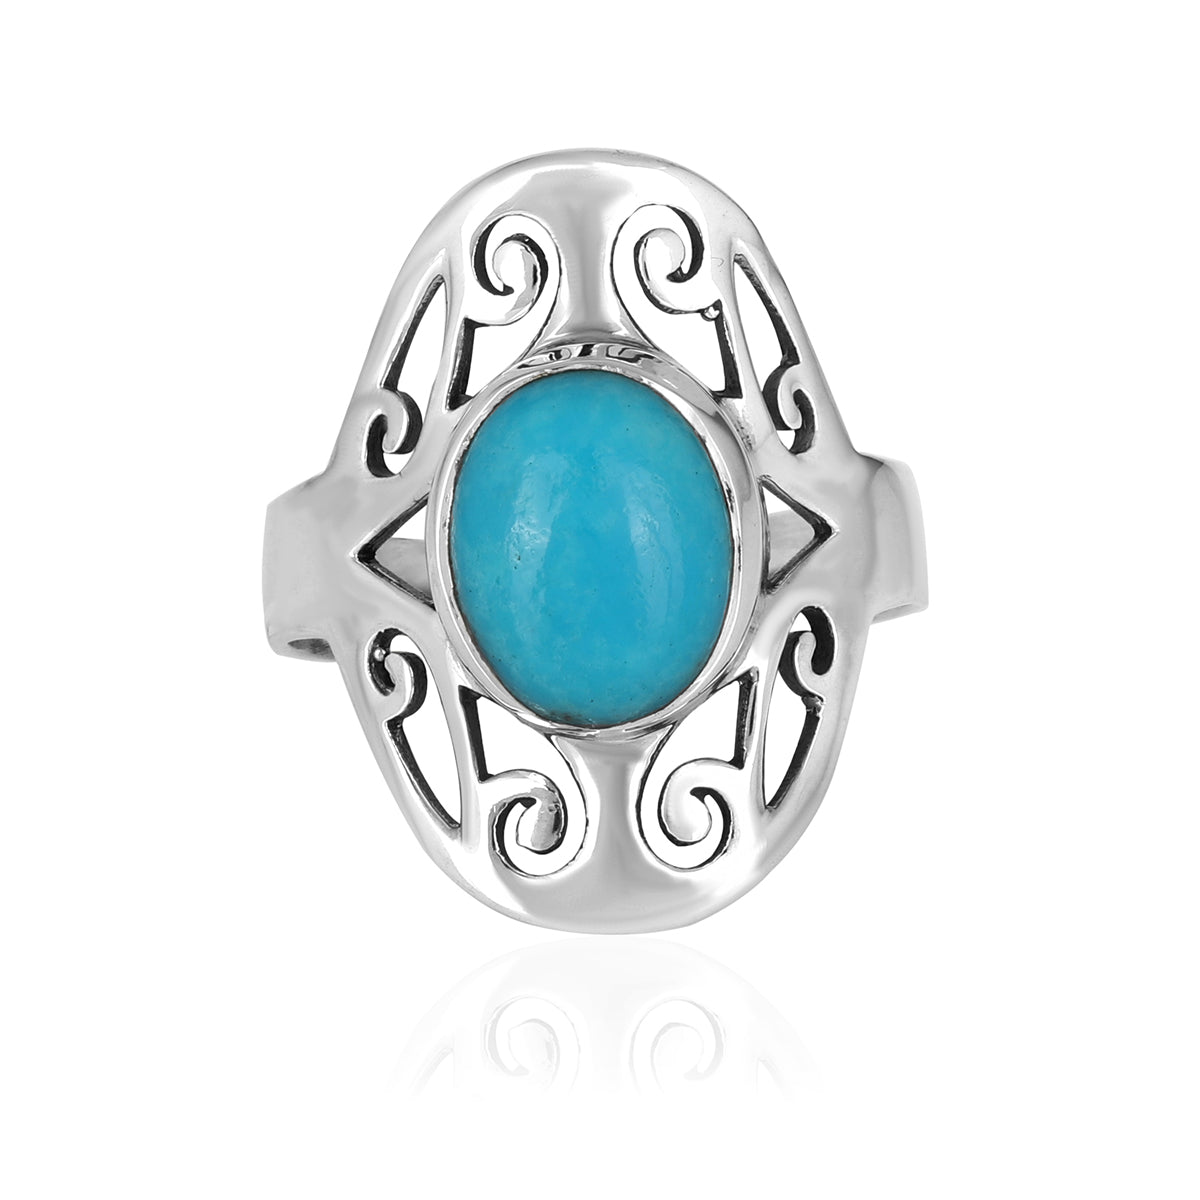 Turquoise Handmade 925 Silver Ring